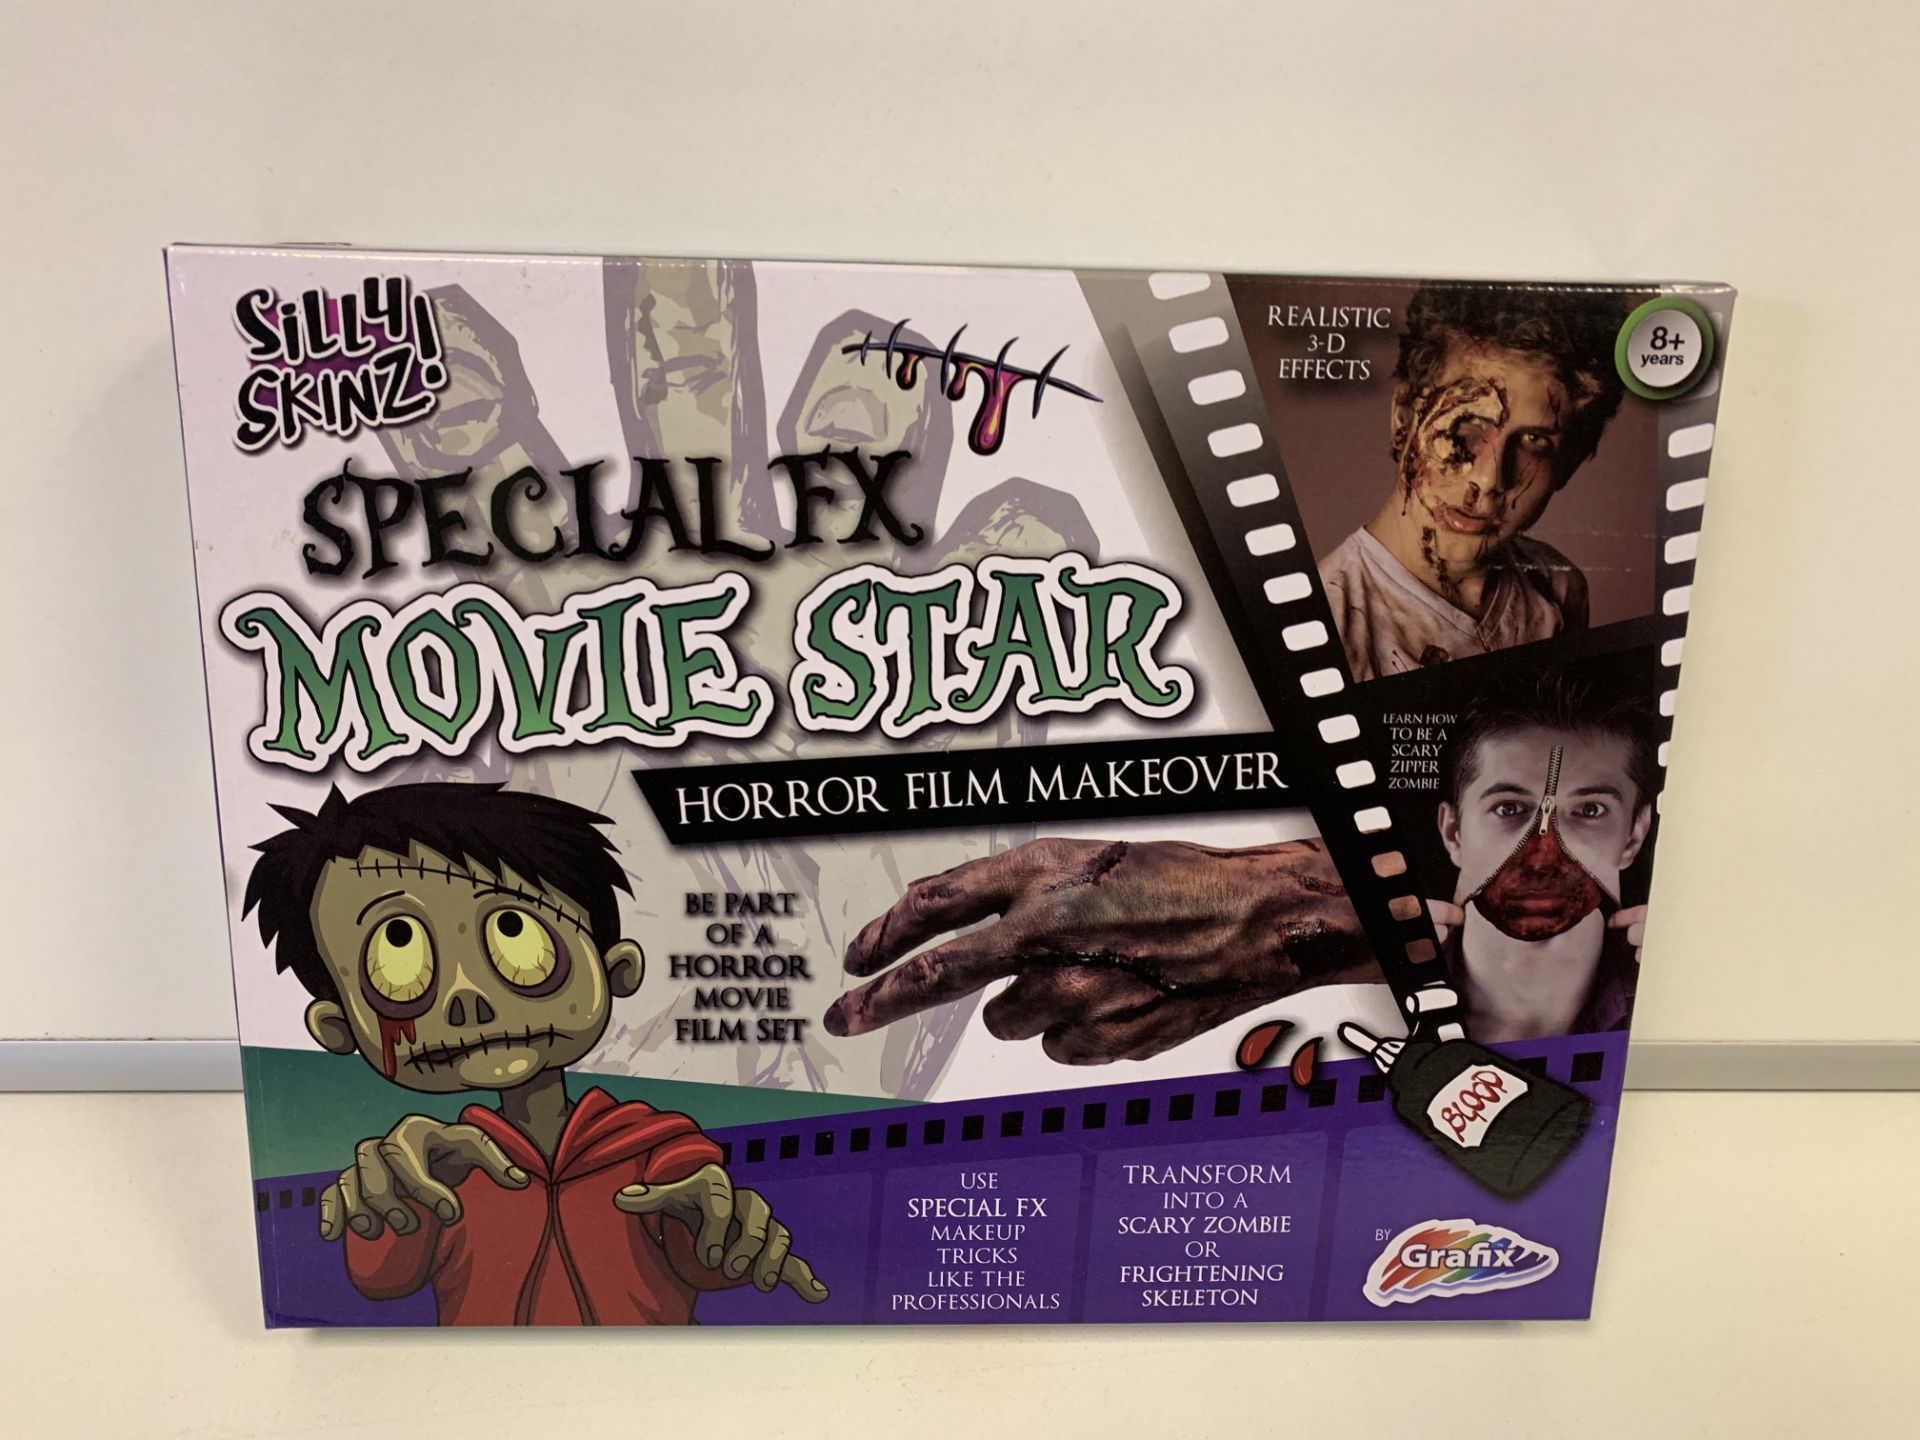 PALLET TO CONTAIN 100 x NEW BOXED GRAFIX SPECIAL FX MOVIE STAR HORROR FILM MAKEOVER KITS. RRP £10.99